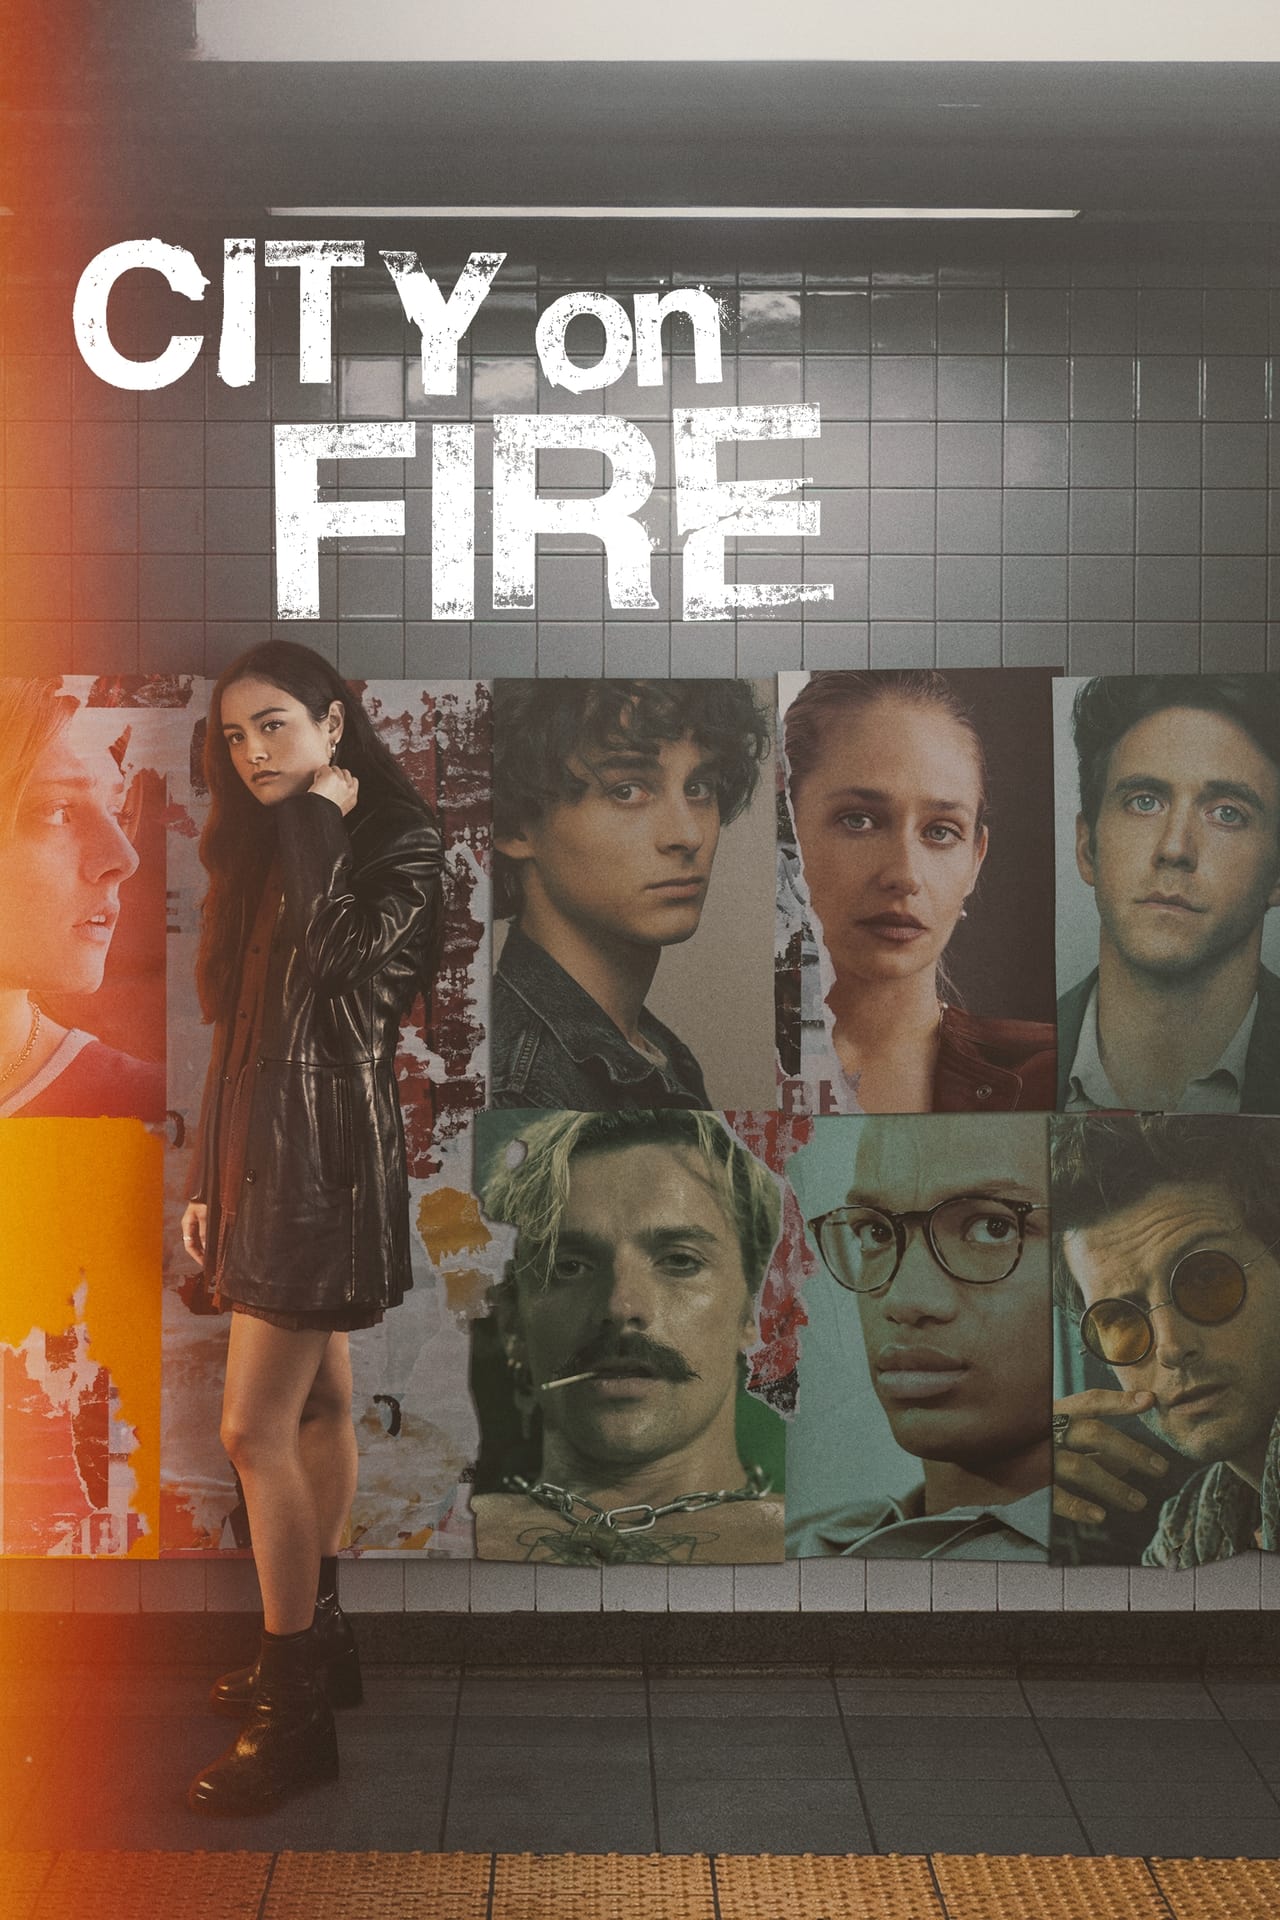 Read more about the article City on Fire (Episode 6 Added) | TV Series